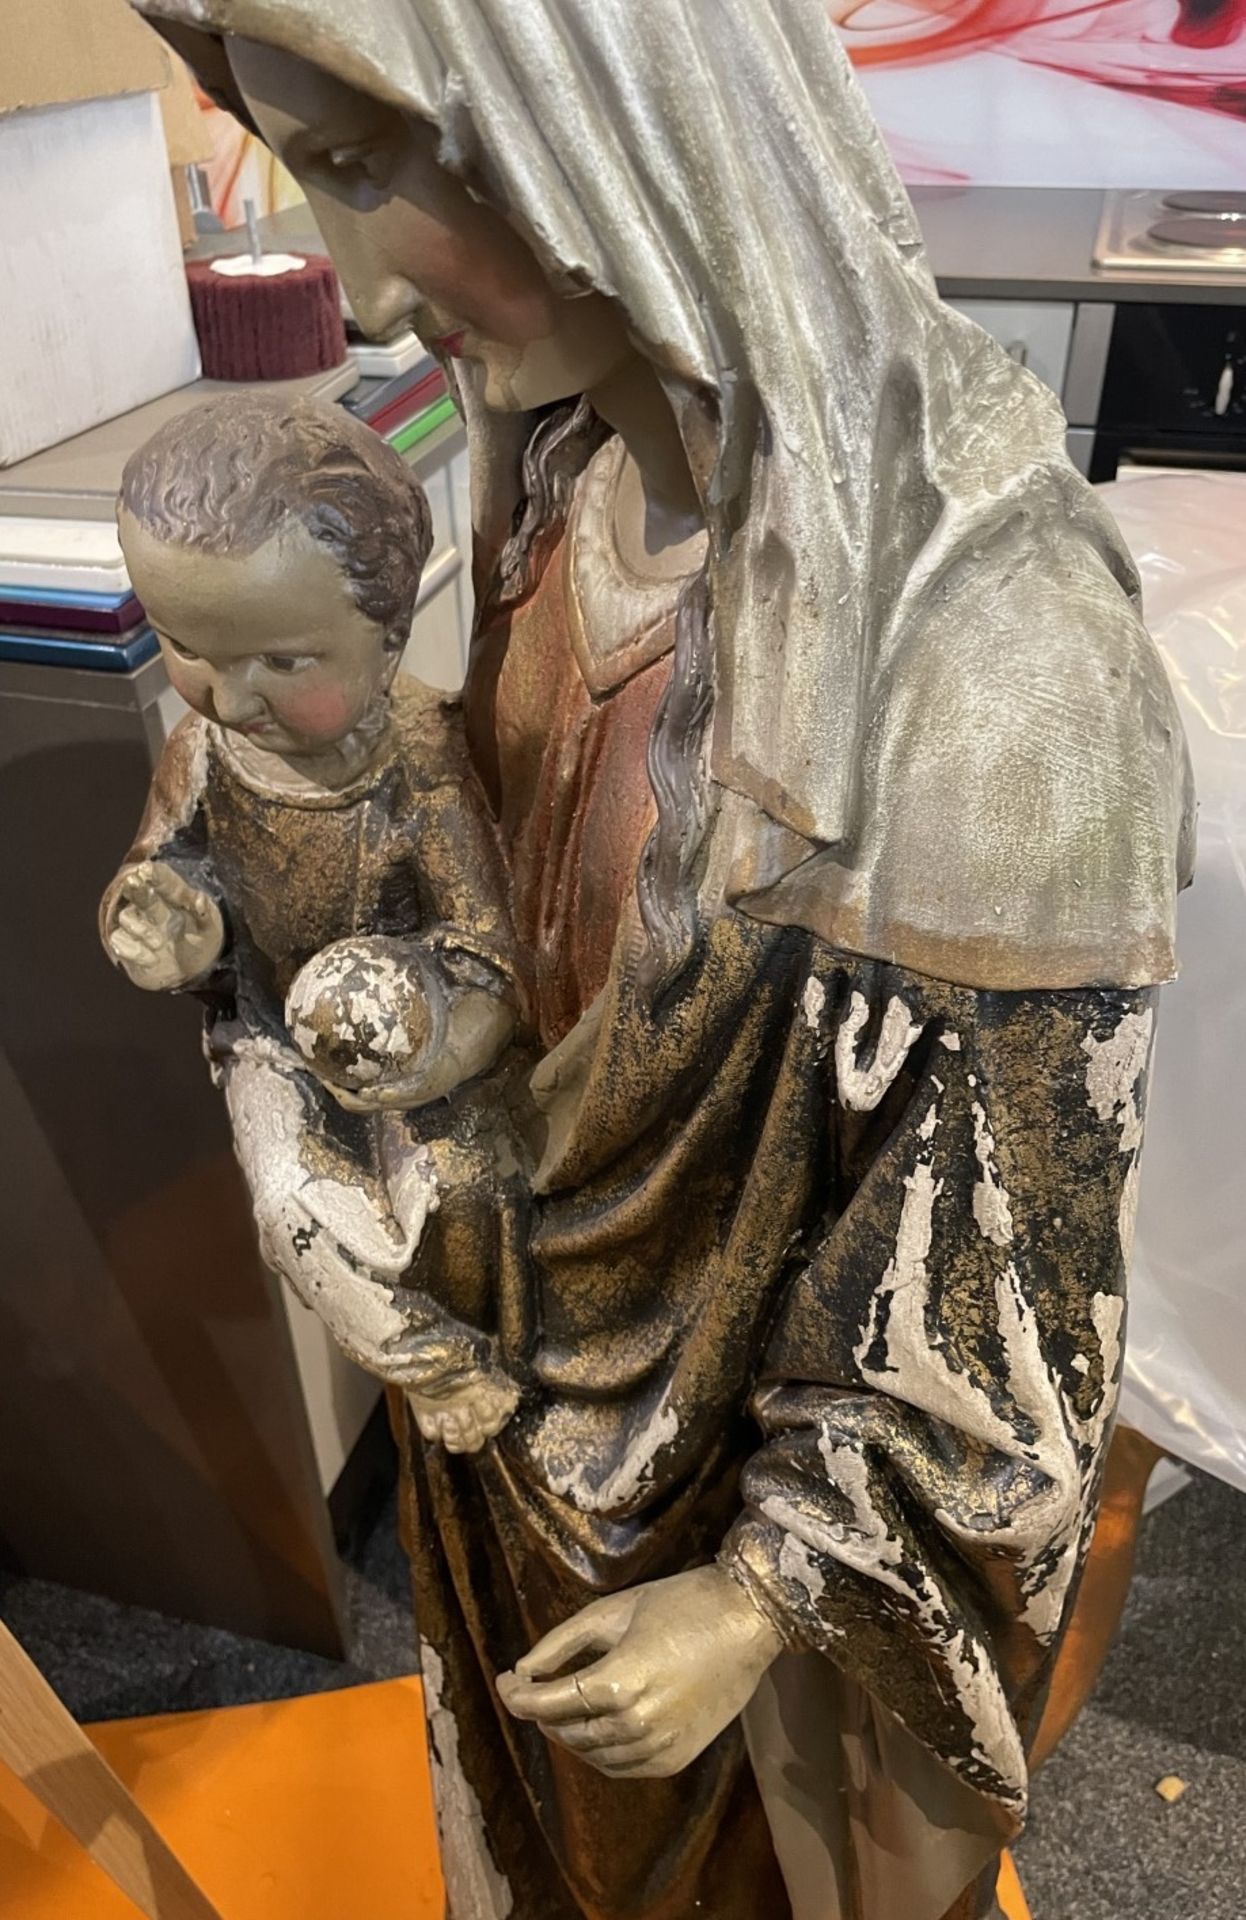 1 x Large Statue of Mary and Baby Jesus - Recently Removed from a Luxury Furniture Retailer - Ref: D - Image 5 of 5